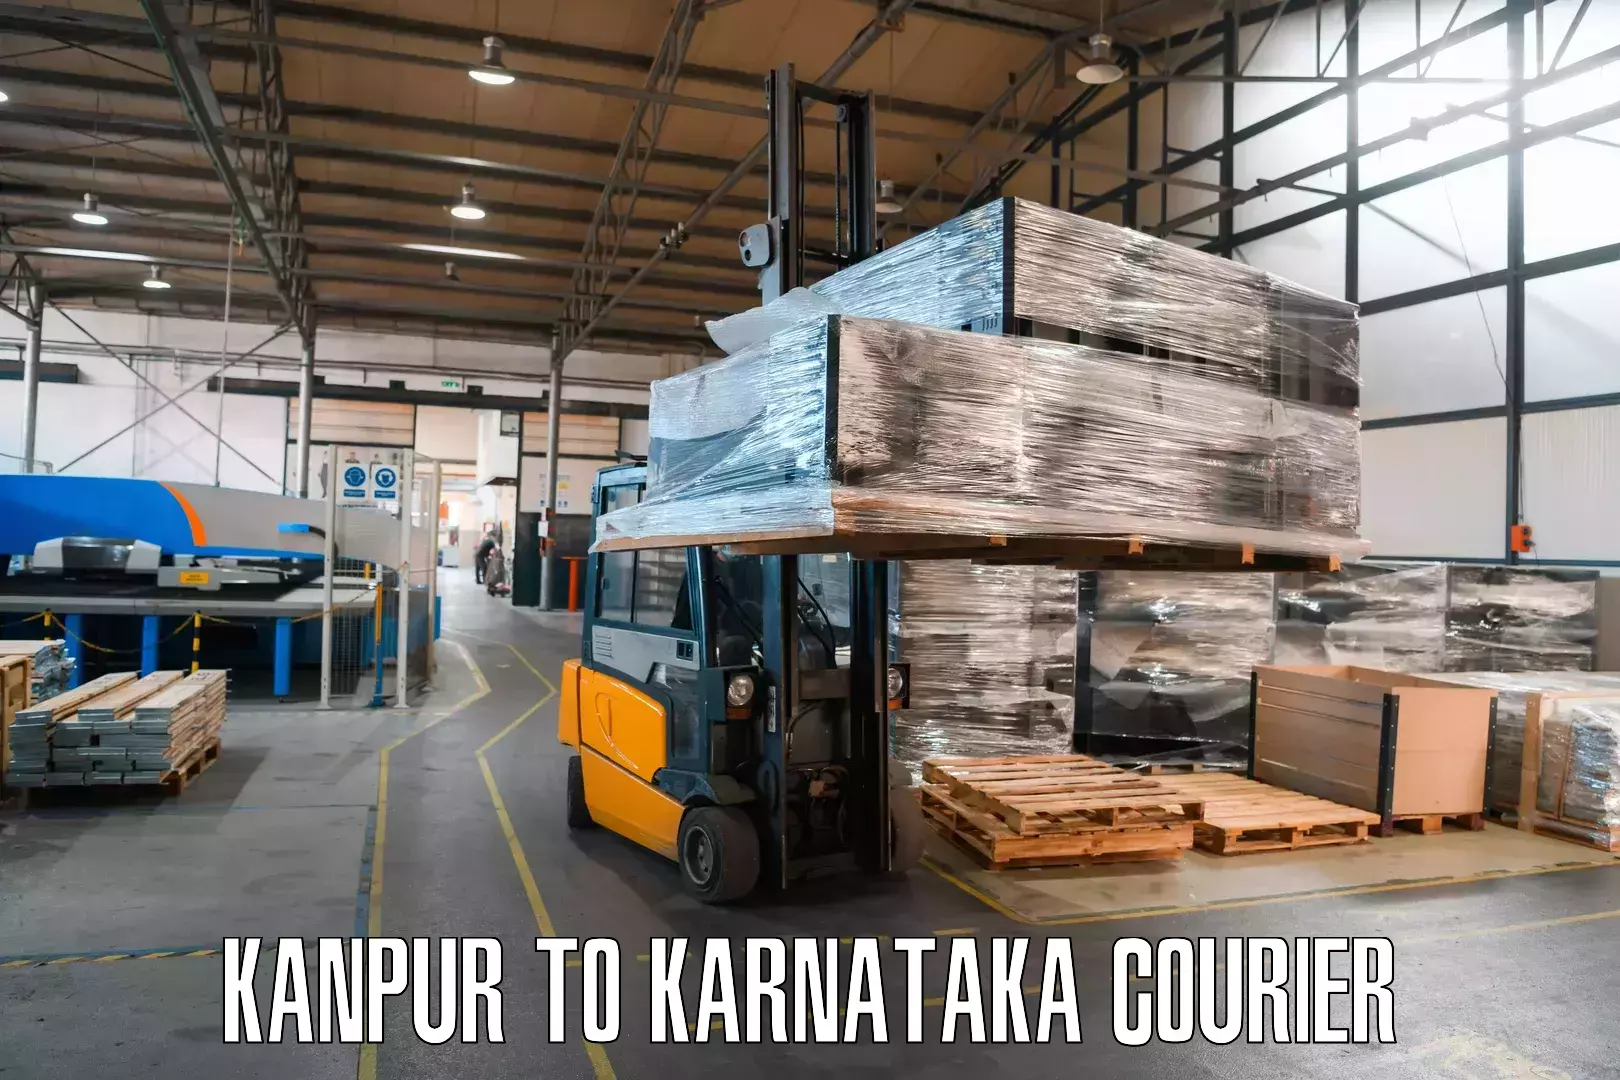 Reliable delivery network Kanpur to Karnataka